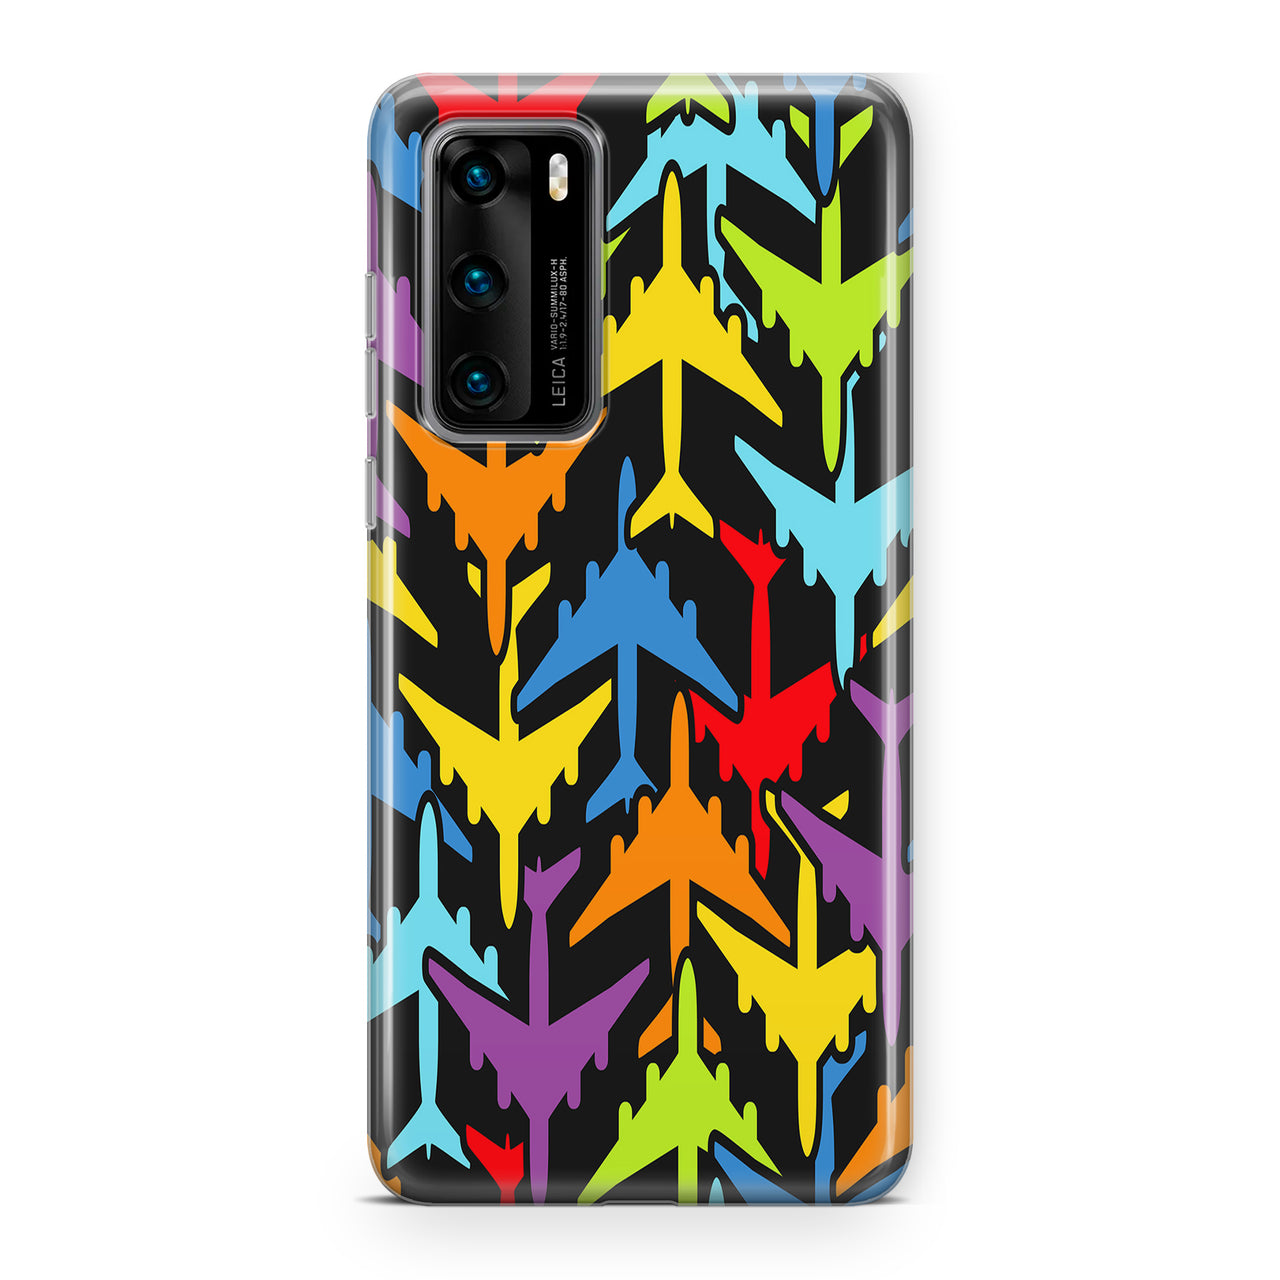 Super Colourful Airplanes Designed Huawei Cases